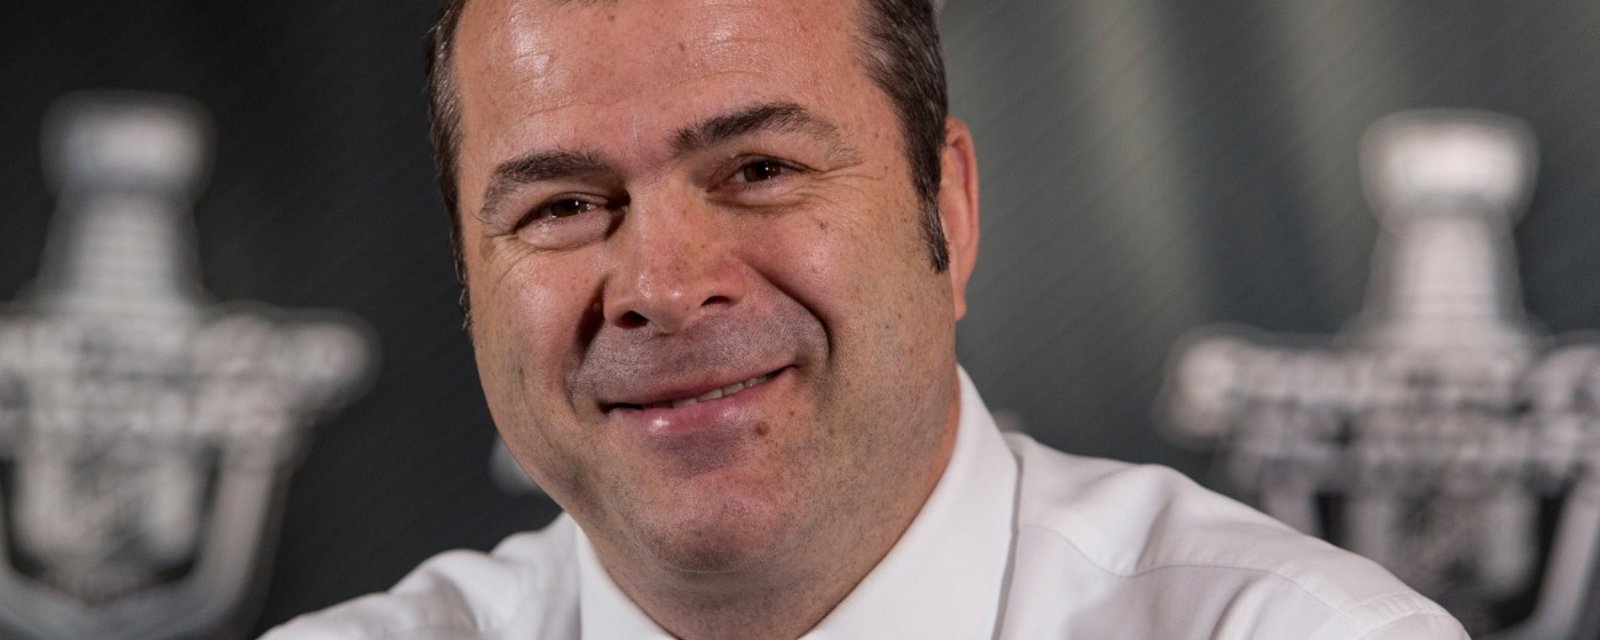 Coach Vigneault reaches HUGE milestone with win.